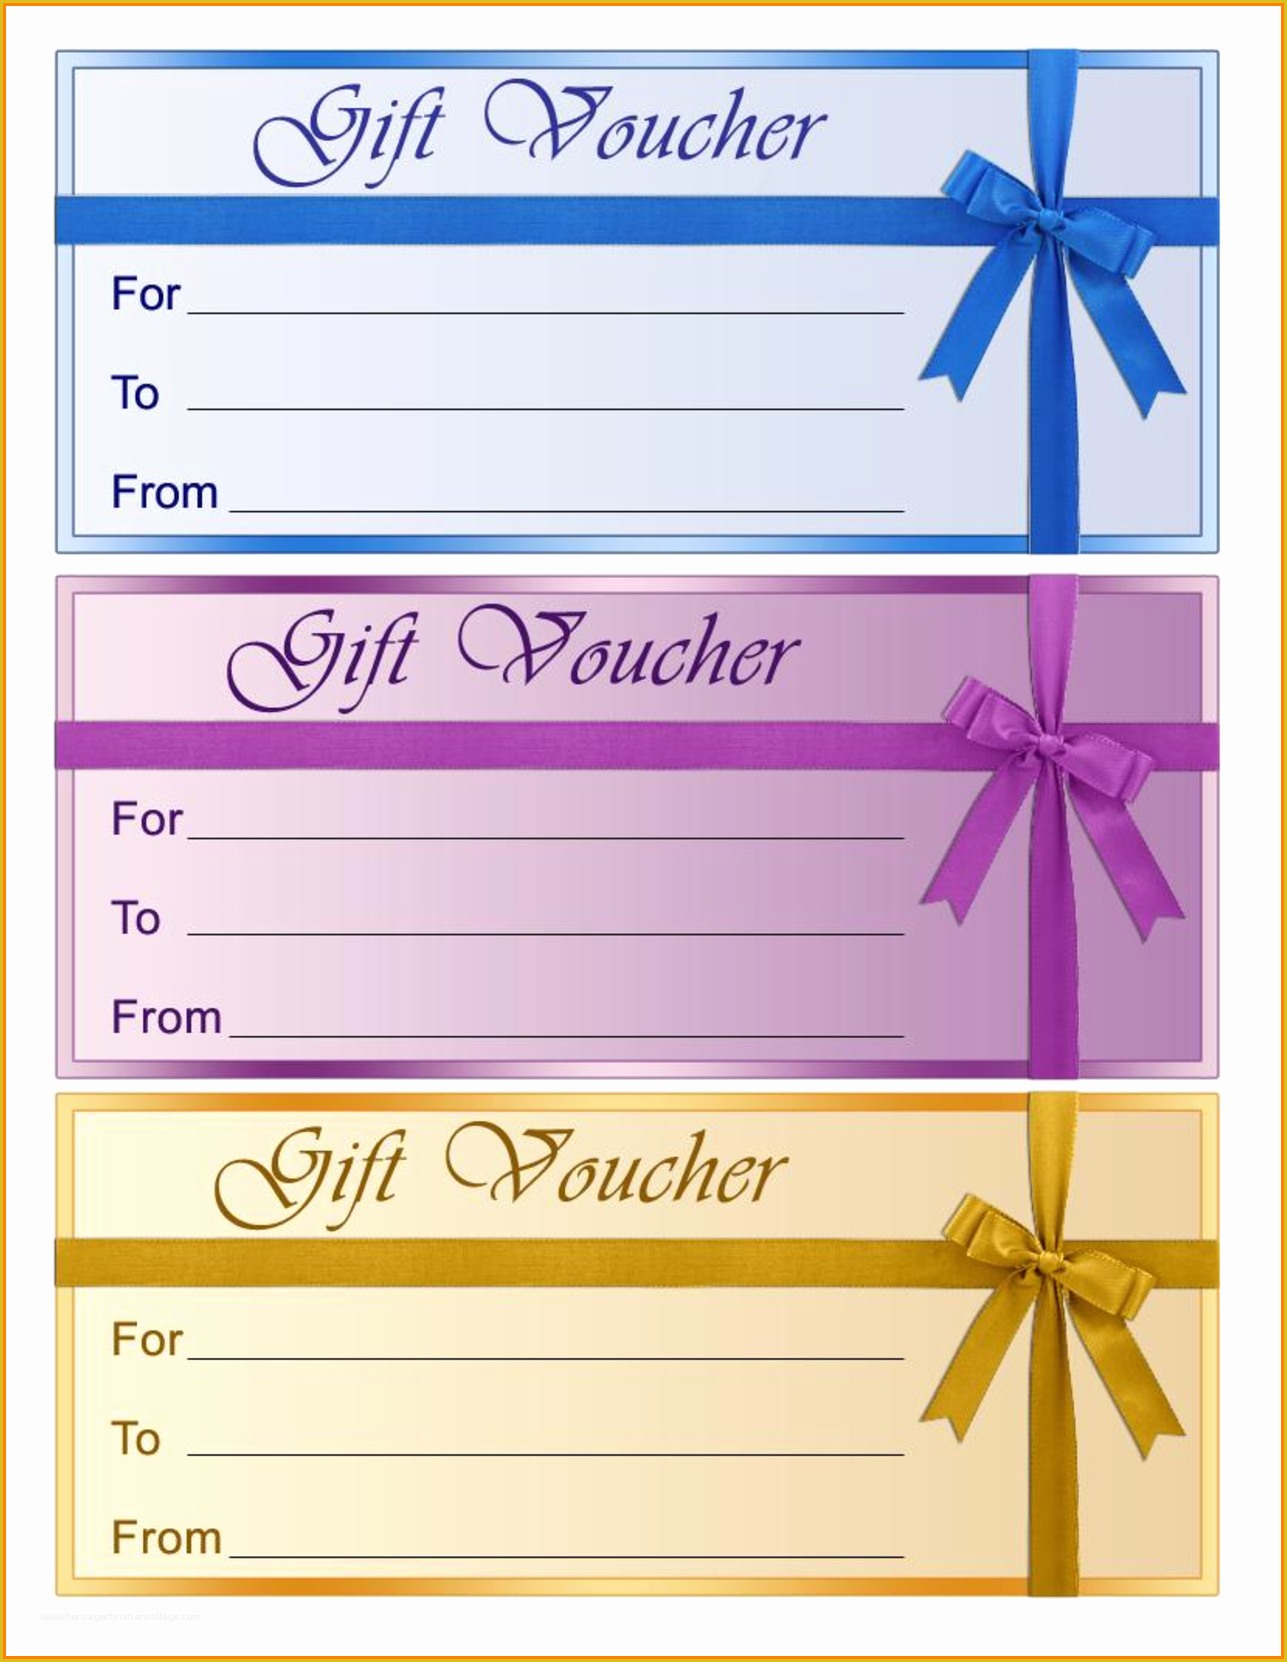 Free Printable Gift Certificates Templates Of Perfect format Samples Of Gift Voucher and Certificate